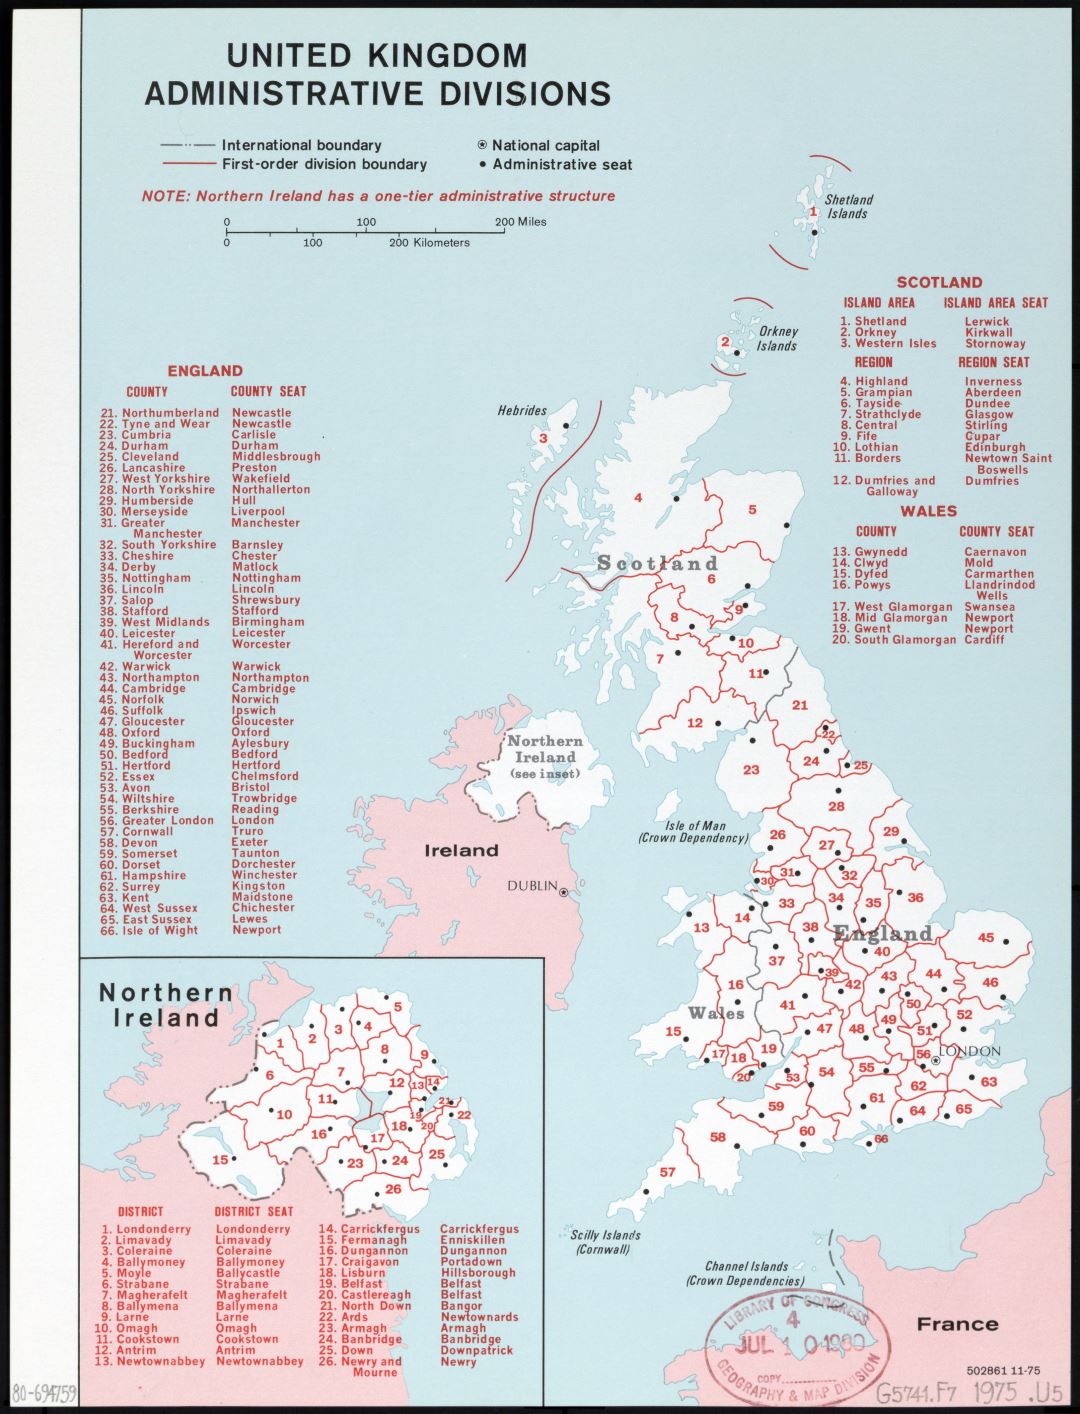 Large scale administrative divisions map of United Kingdom - 1975